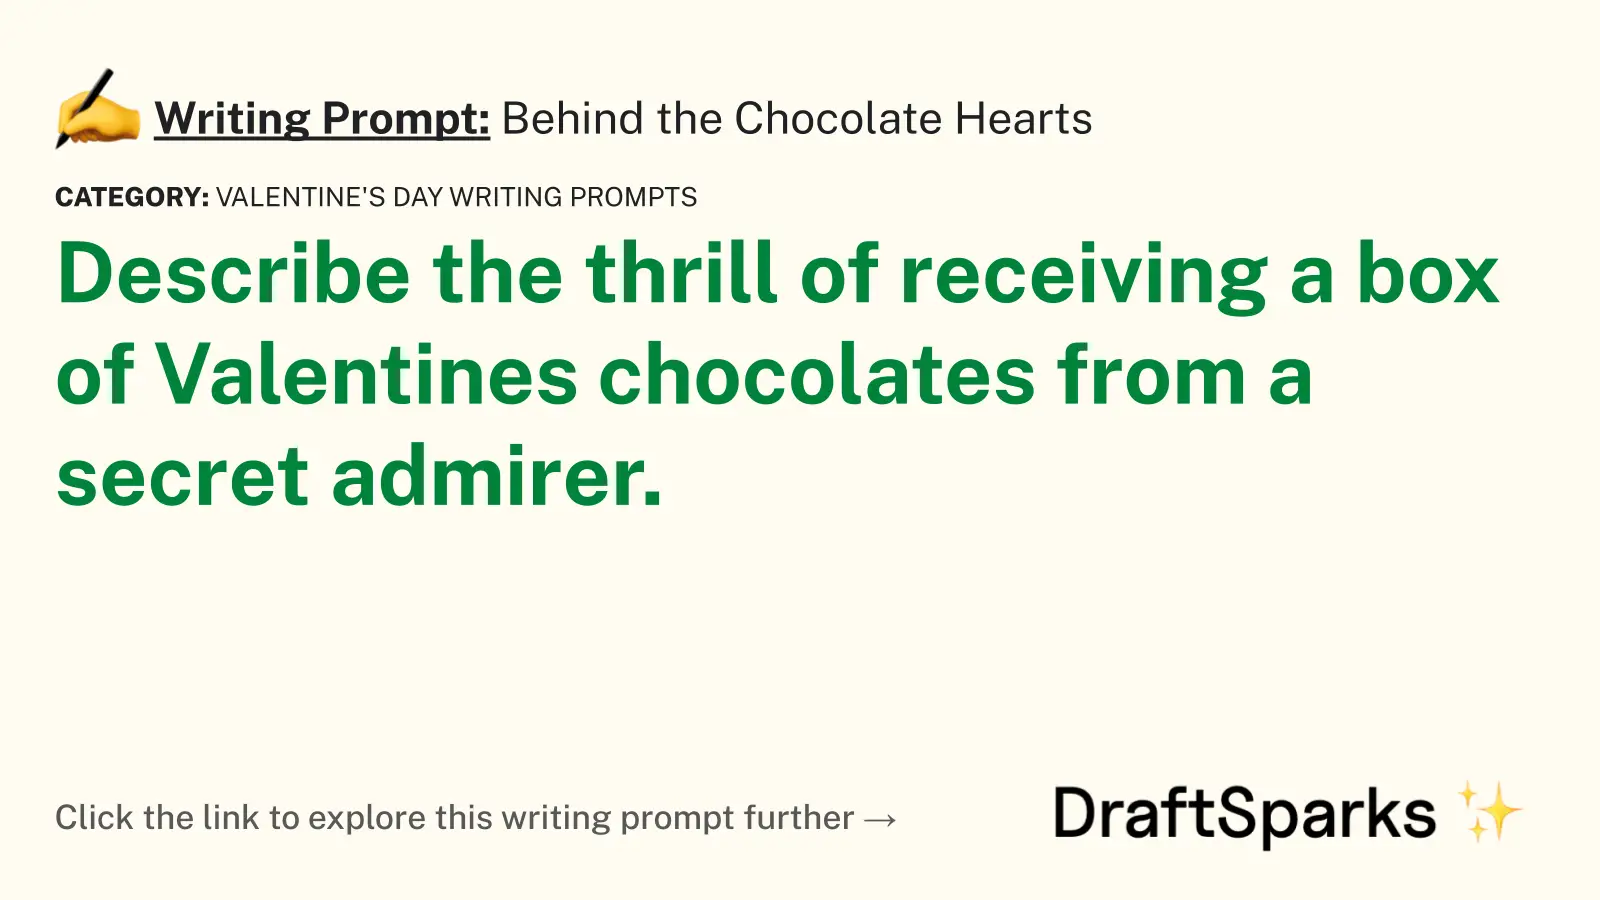 Behind the Chocolate Hearts